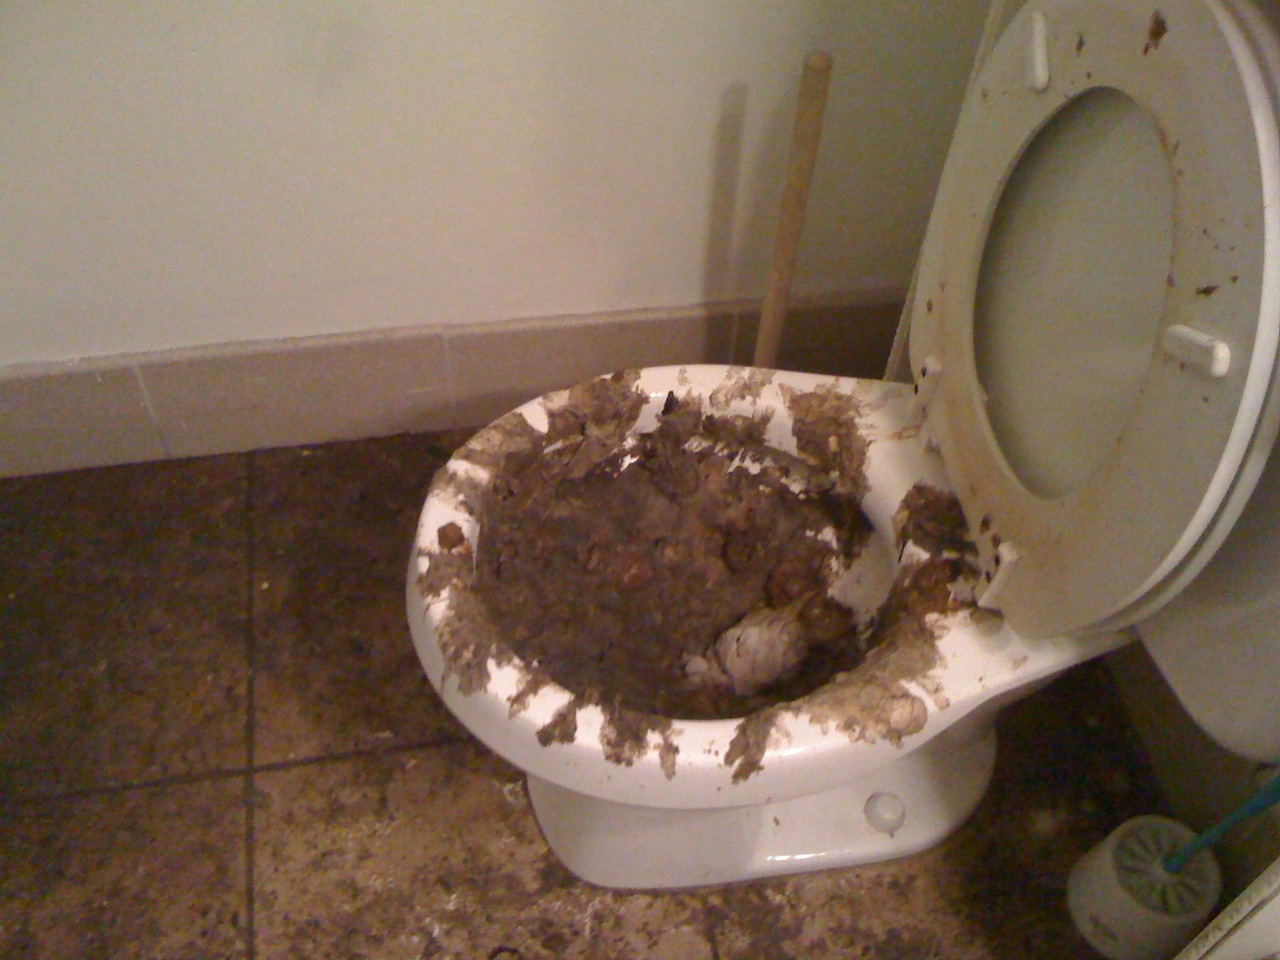 Don't flush non-flushable baby wipes, because this happens. : WTF Chemical That Dissolves Human Feces In Pit Toilet